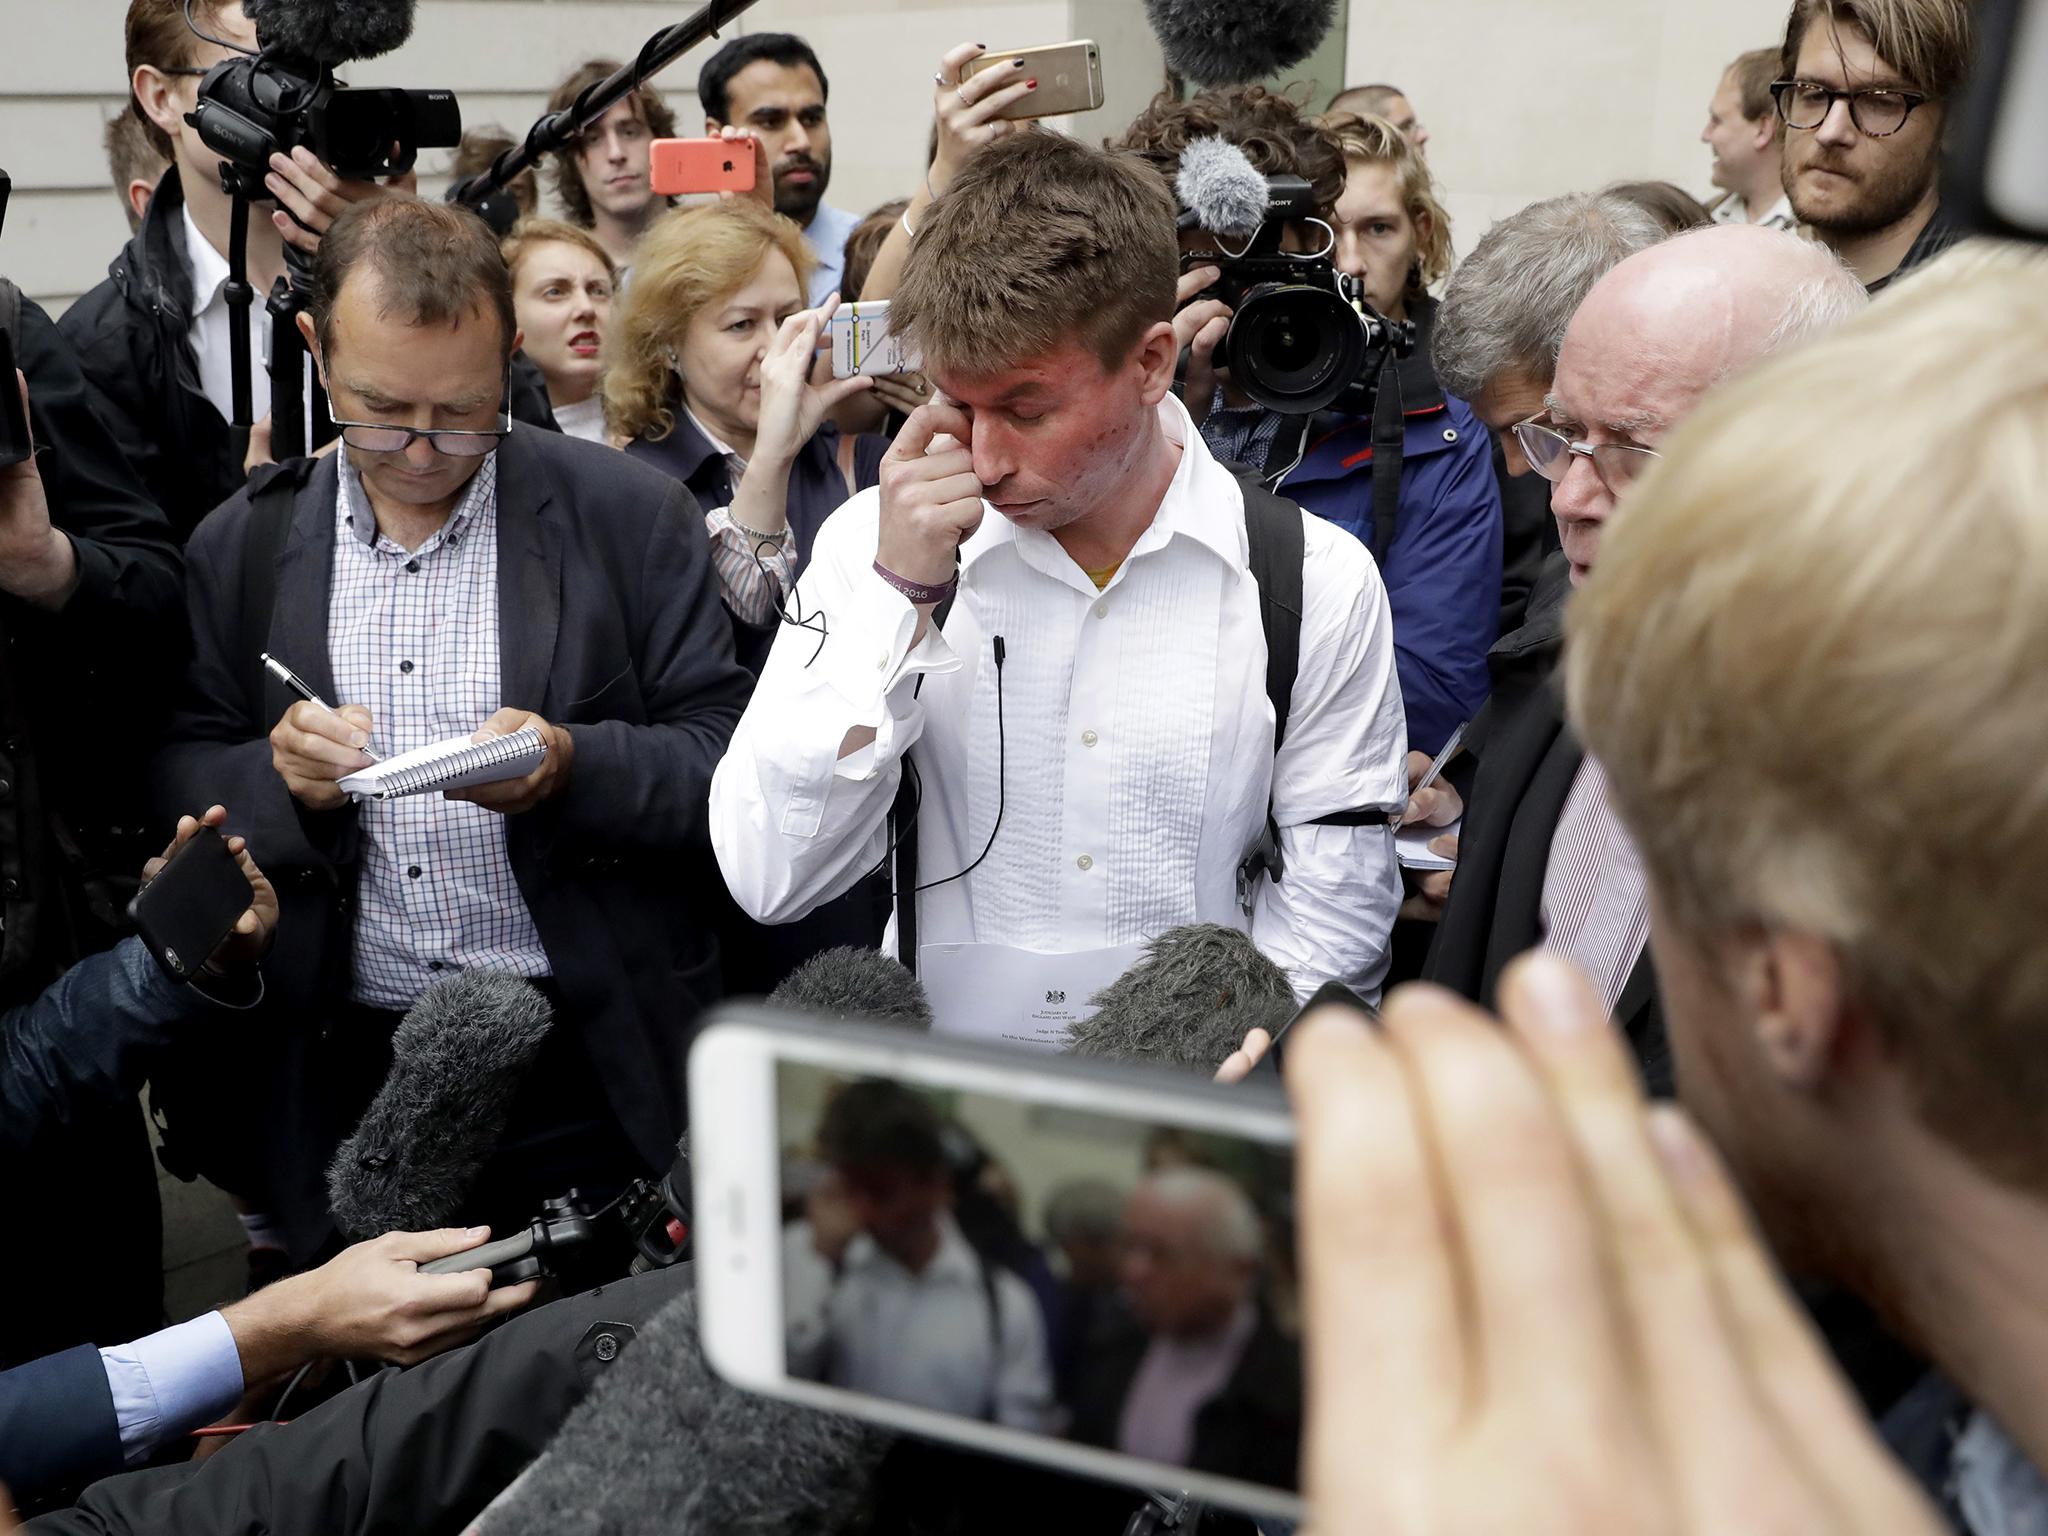 British national Lauri Love, who is accused of hacking into U.S. government computers, wipes away tears while speaking to the media after the ruling that he should be extradited, outside Westminster Magistrates' Court in London